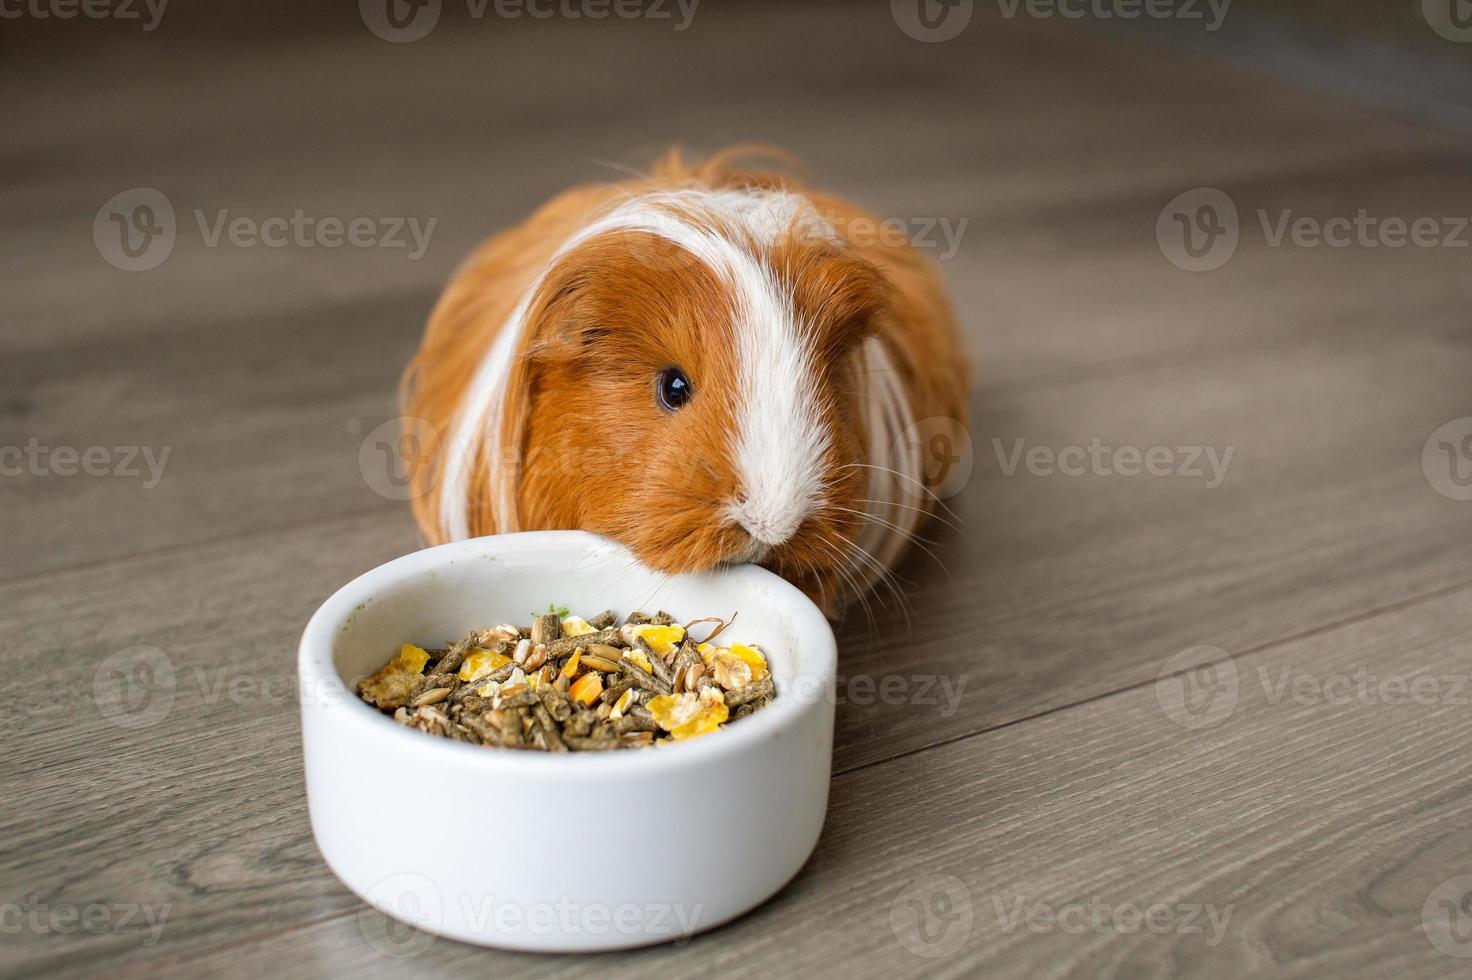 A long-haired guinea pig is sitting on the floor near a plate of food photo